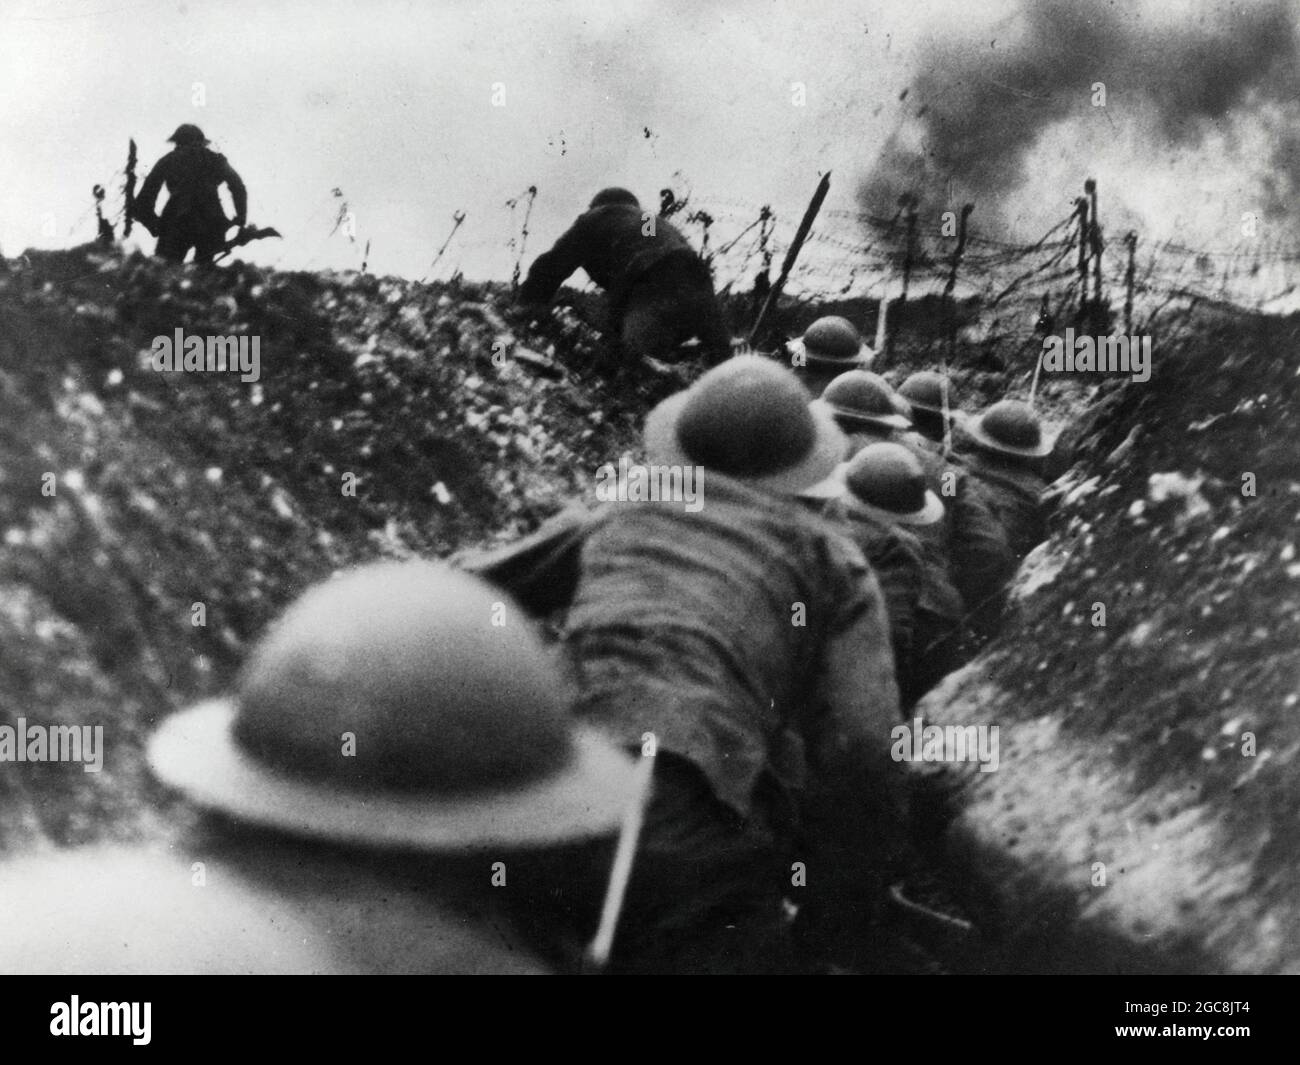 THE SOMME, FRANCE - July 1916 - British soldiers go 'over the top' from a trench during the Battle of the Somme during the First World War. The Battle Stock Photo